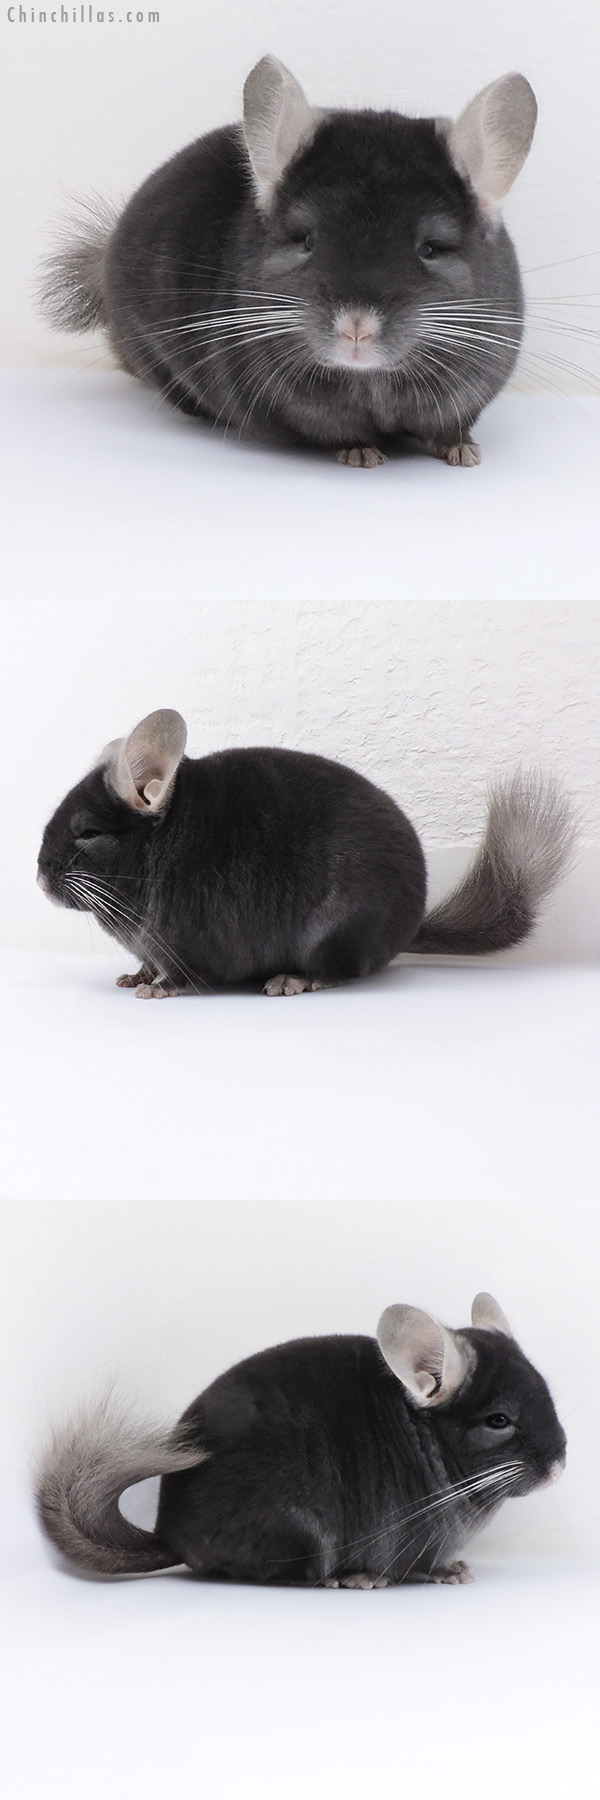 Chinchilla or related item offered for sale or export on Chinchillas.com - 17404 Show Quality Dark Wrap Around Sapphire Male Chinchilla